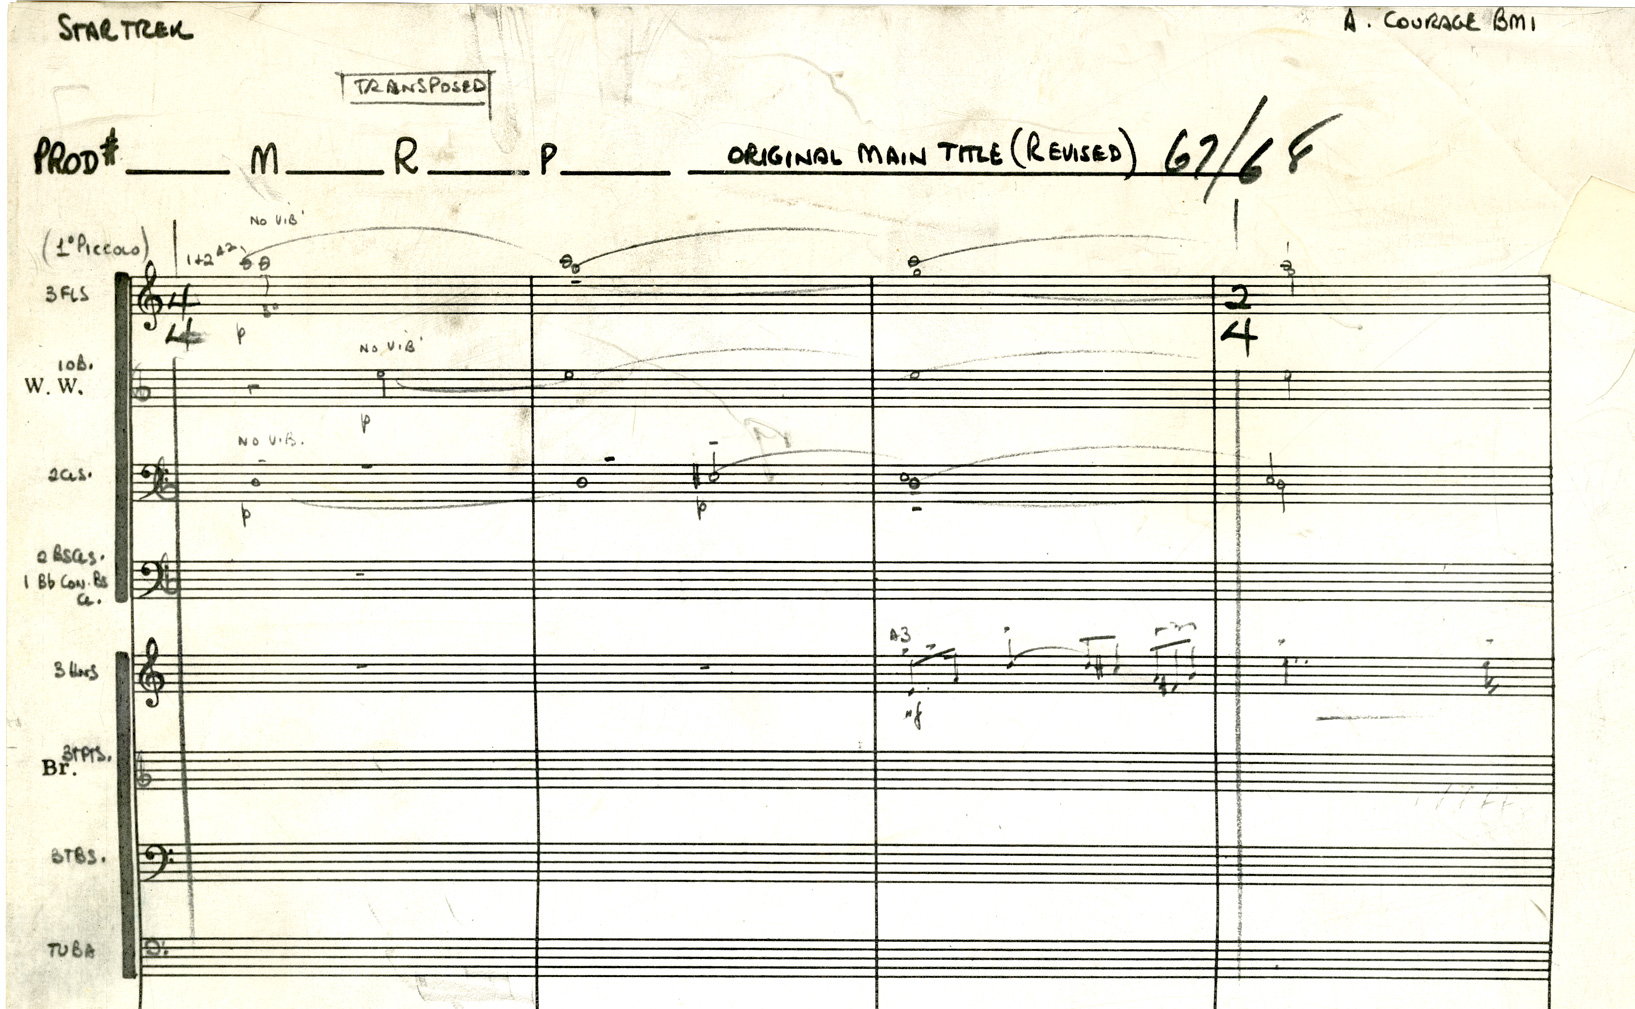 A reproduction of the original Alexander Courage ’41E score of the Star Trek theme is part of the Alexander Courage Collection at Eastman’s Sibley Music Library. The collection includes many of Courage’s original scores, scripts, sketches, notes, and recordings for films and television productions; arranged scores for pops orchestras and awards broadcasts; and sheet music, personal papers, and professional as well as personal photographs.